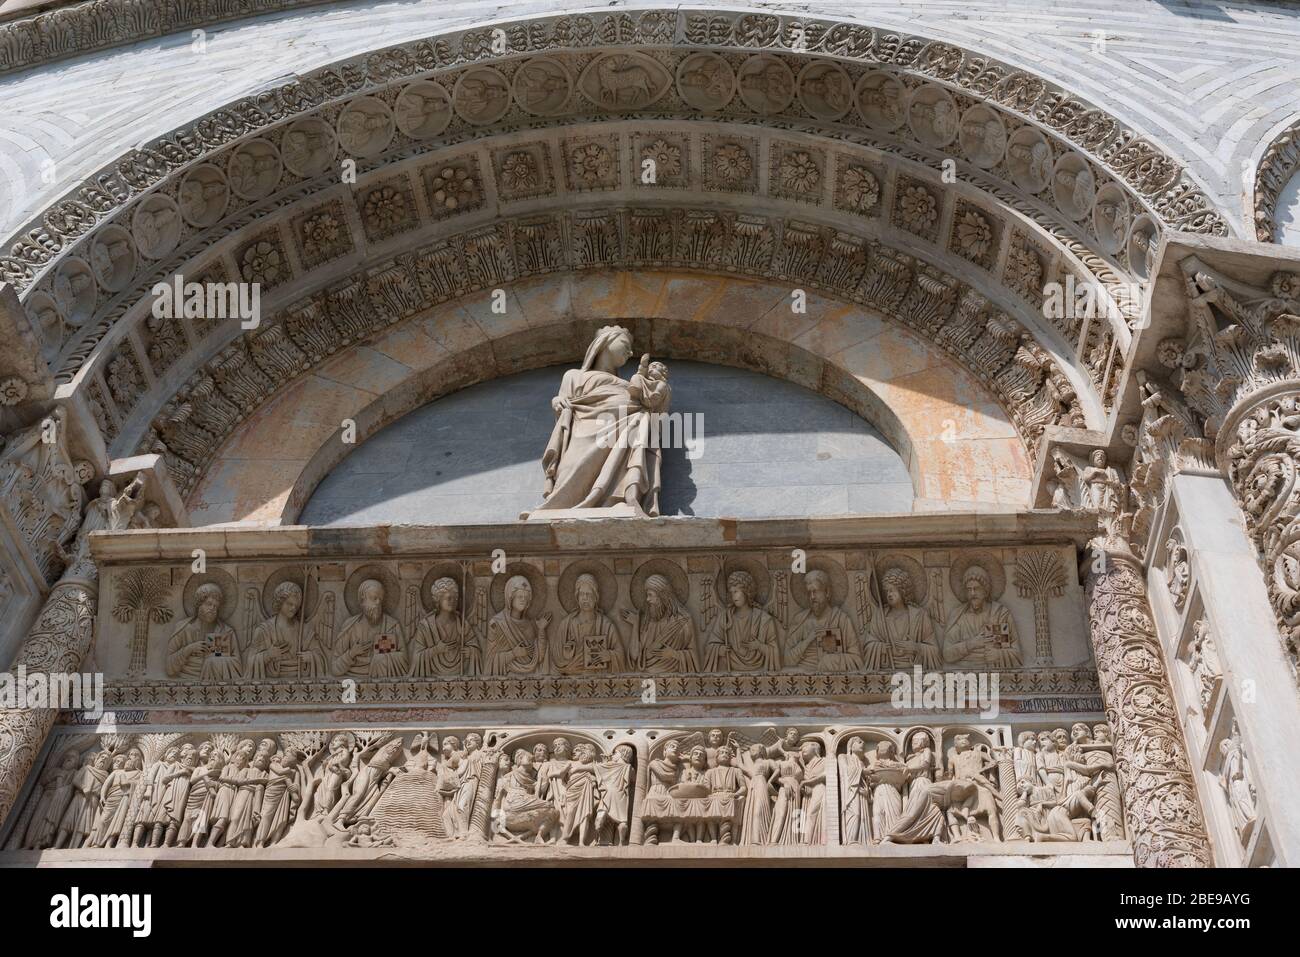 Details of the exterior of the Pisa Baptistery of St. John, the largest baptistery in Italy, in the Square of Miracles Piazza dei Miracoli , Pisa Stock Photo